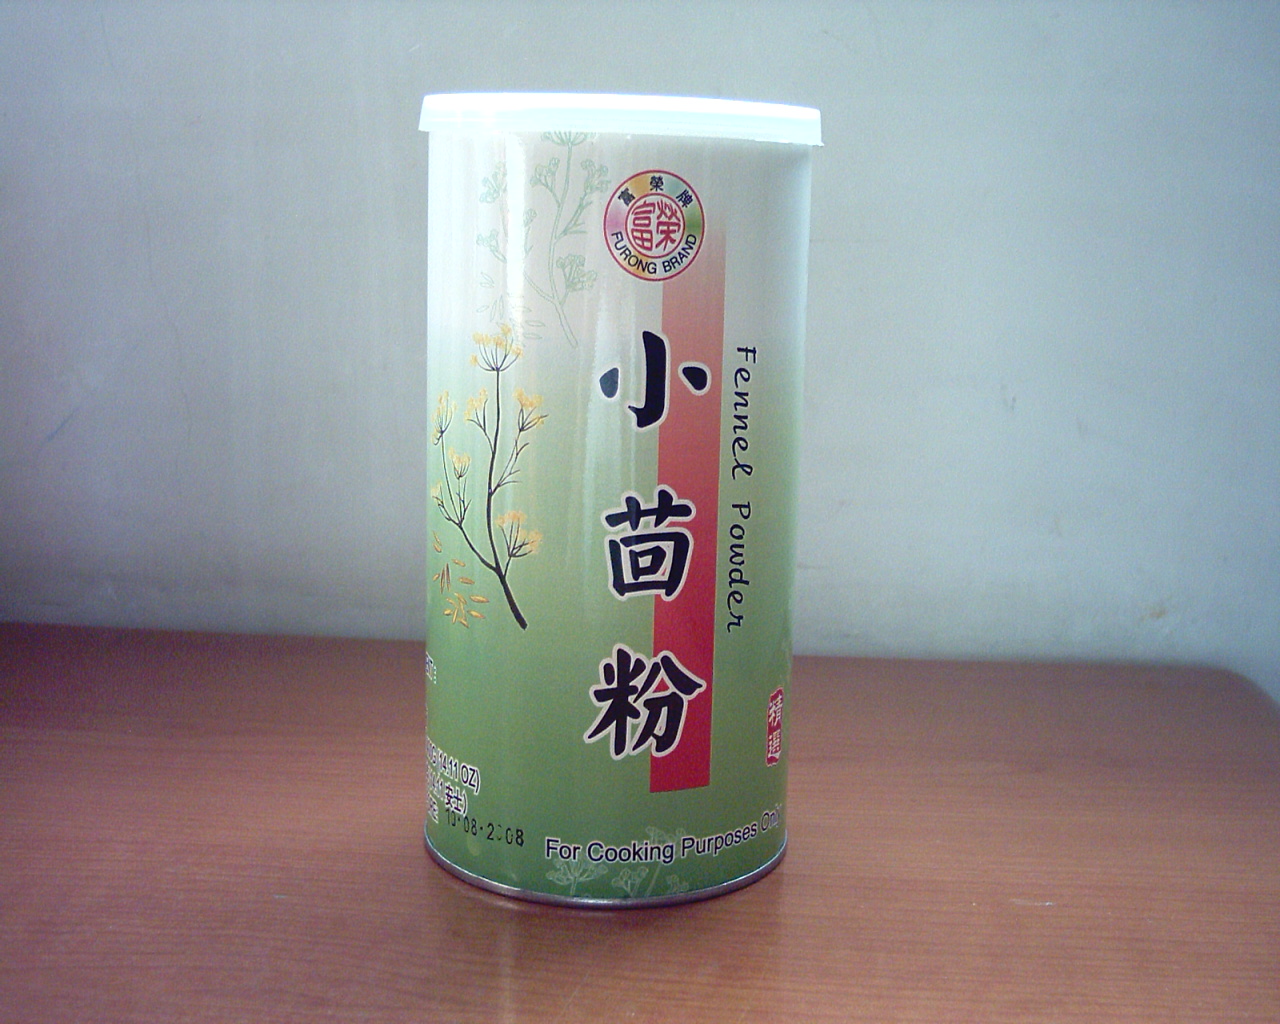 Canned fennel powder used in Indian restaurants